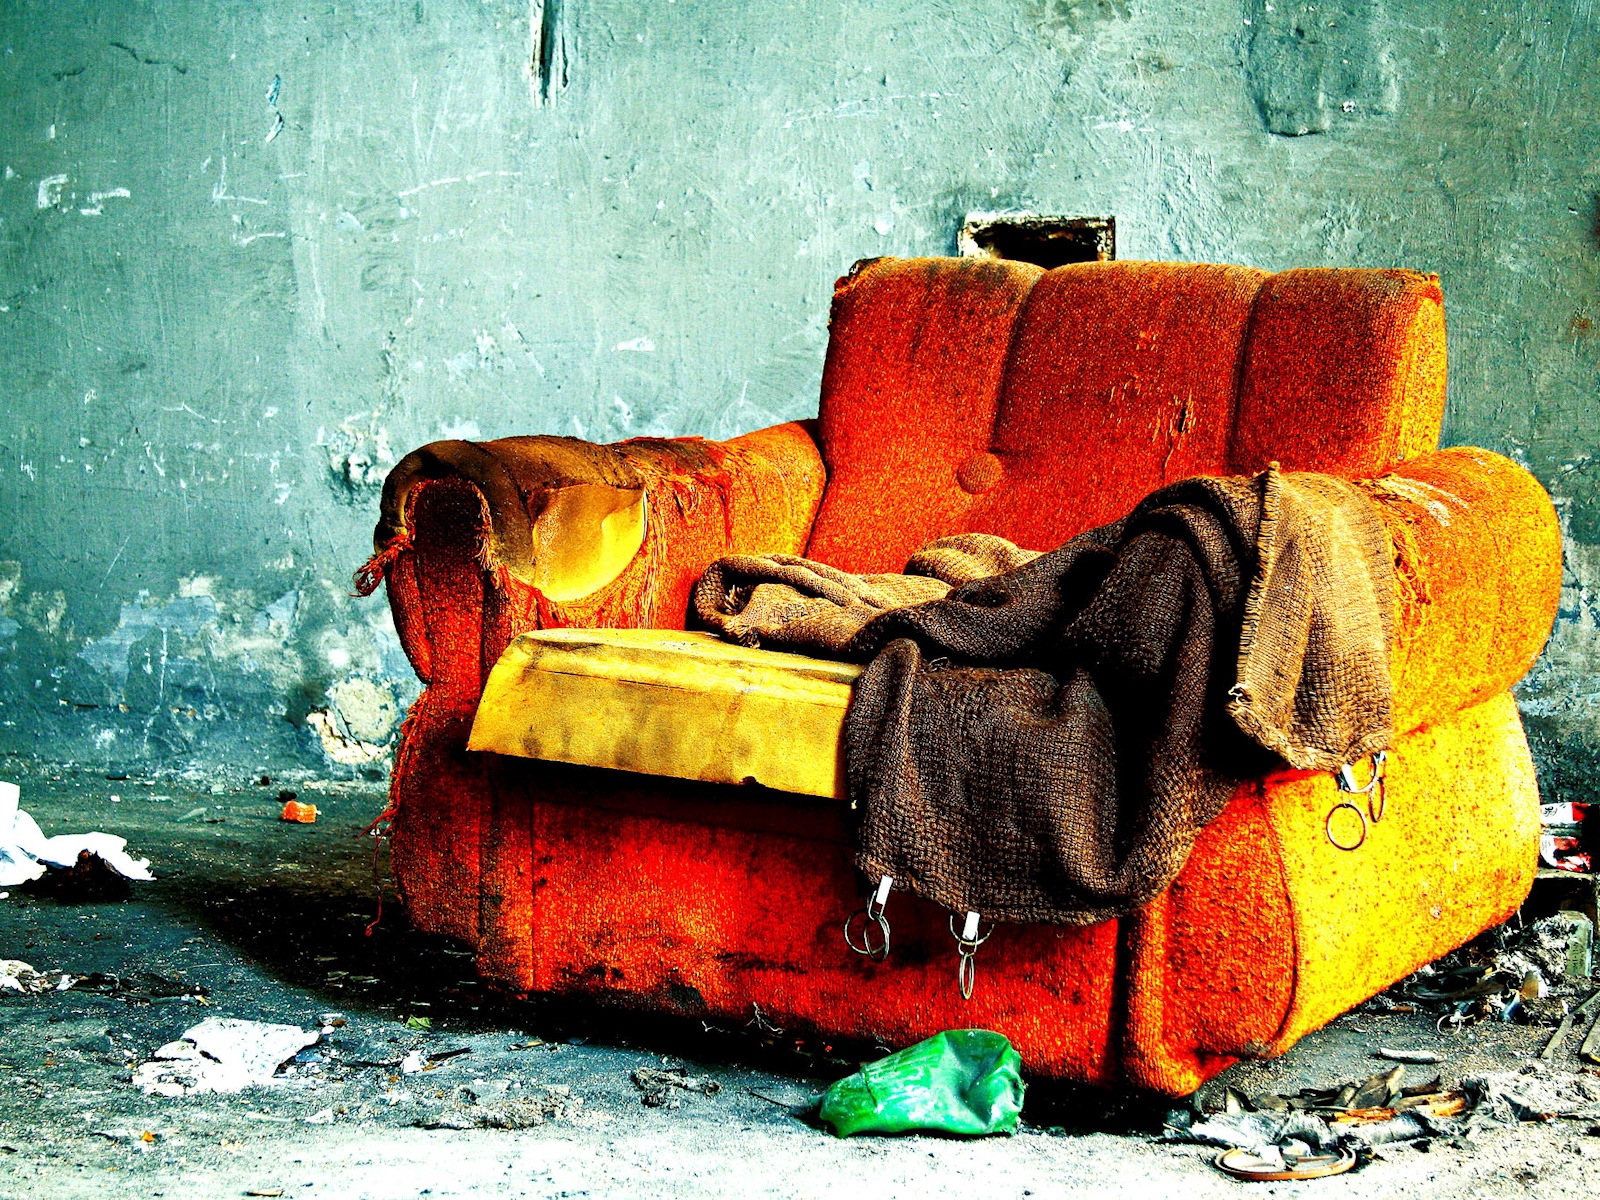 miscellanea, miscellaneous, old, colorful, colourful, armchair, ancient, ragged